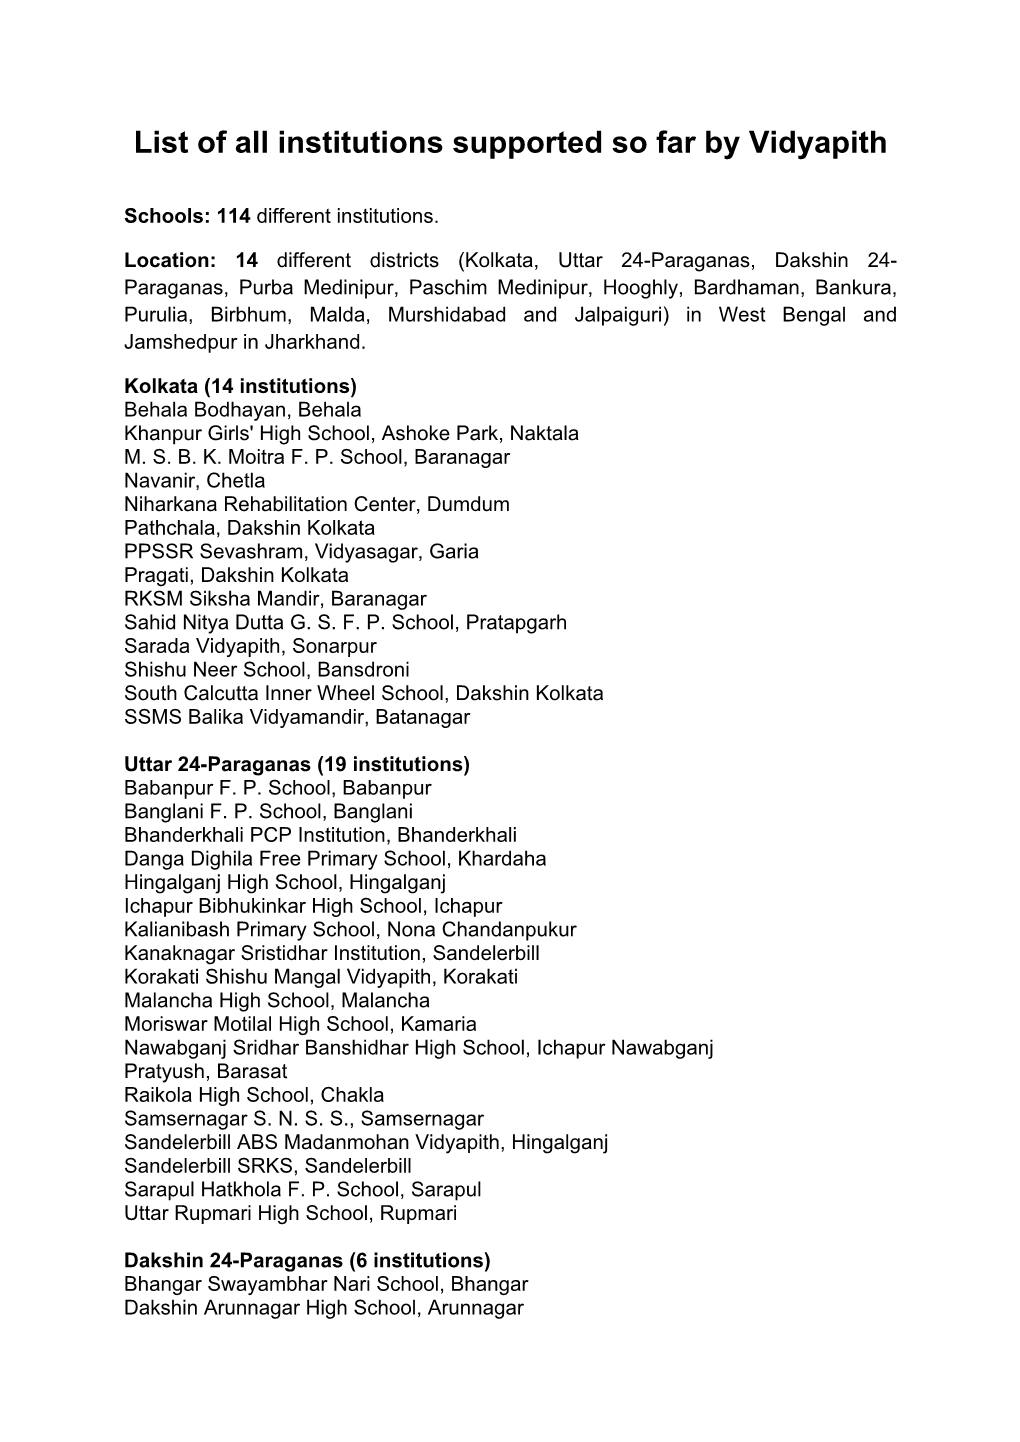 List of All Institutions Supported So Far by Vidyapith